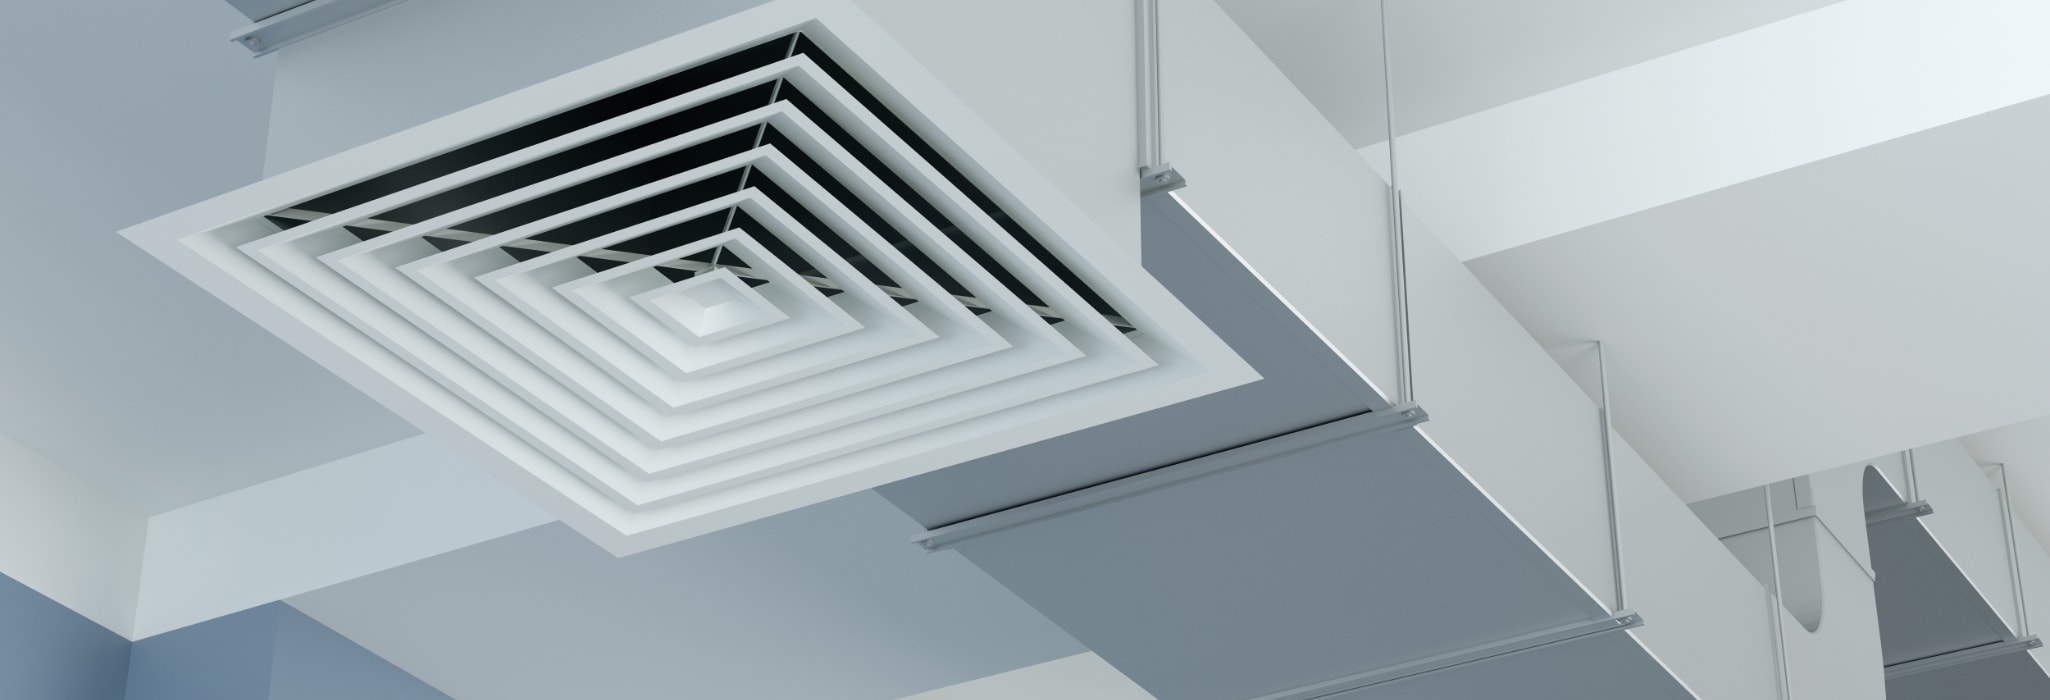 Air duct service.